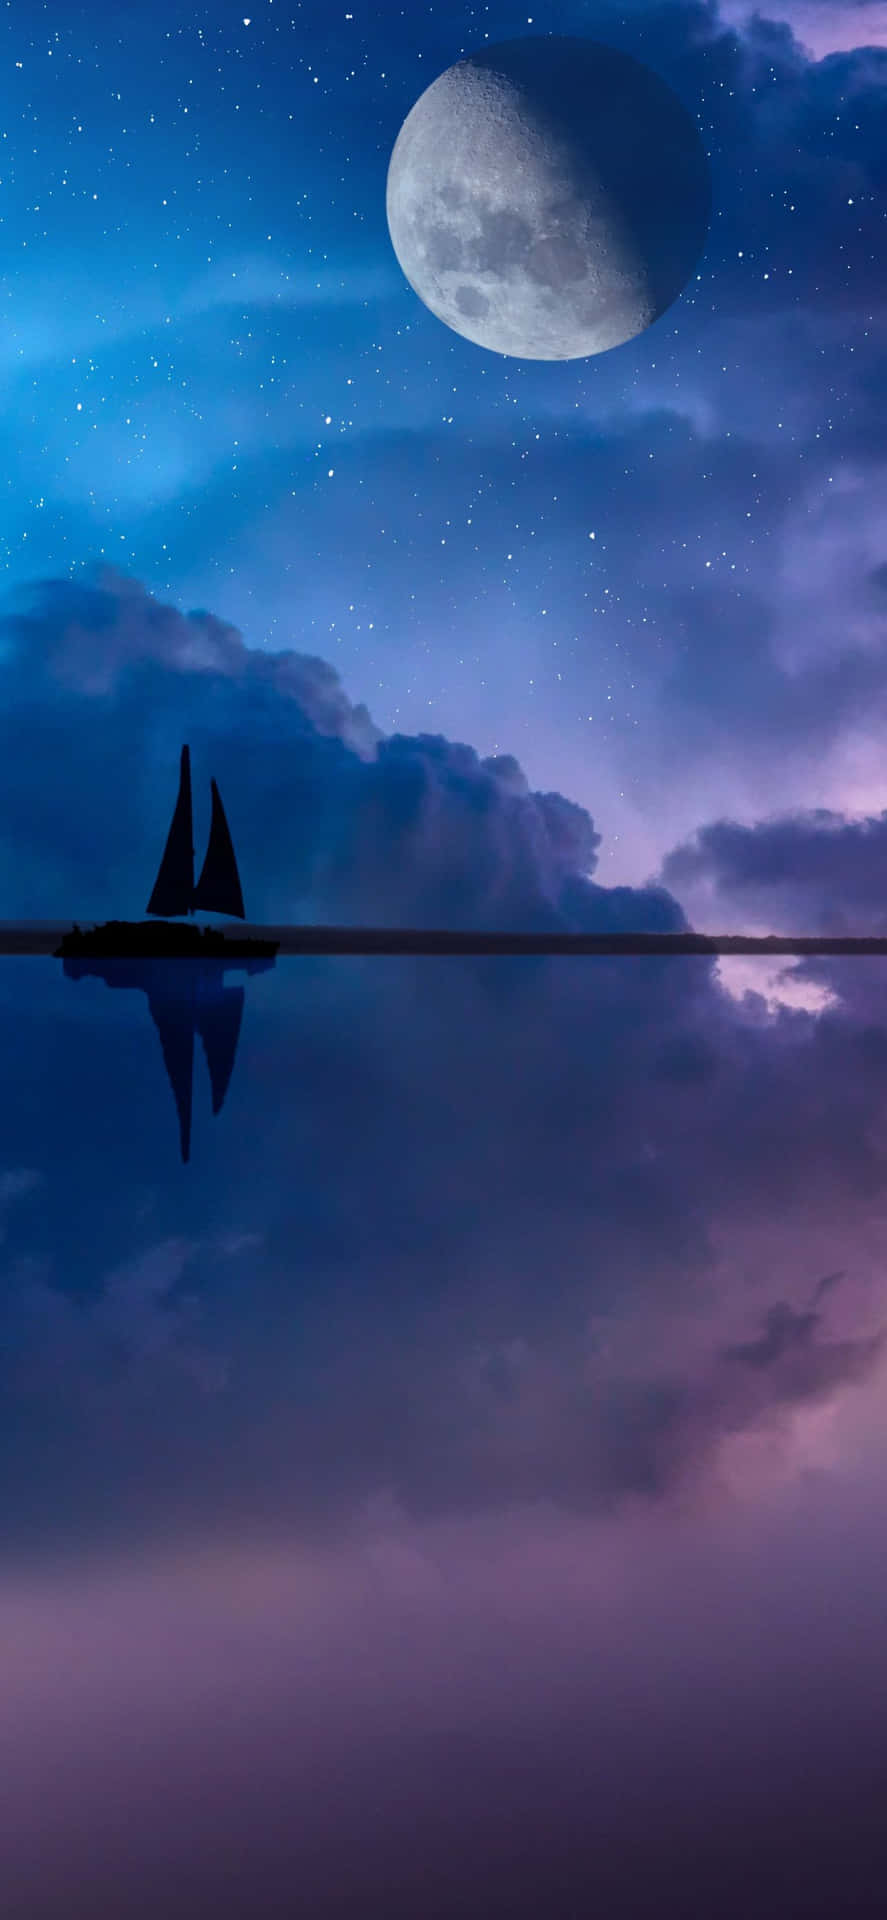 A Boat Is Reflected In The Water With The Moon And Stars Wallpaper